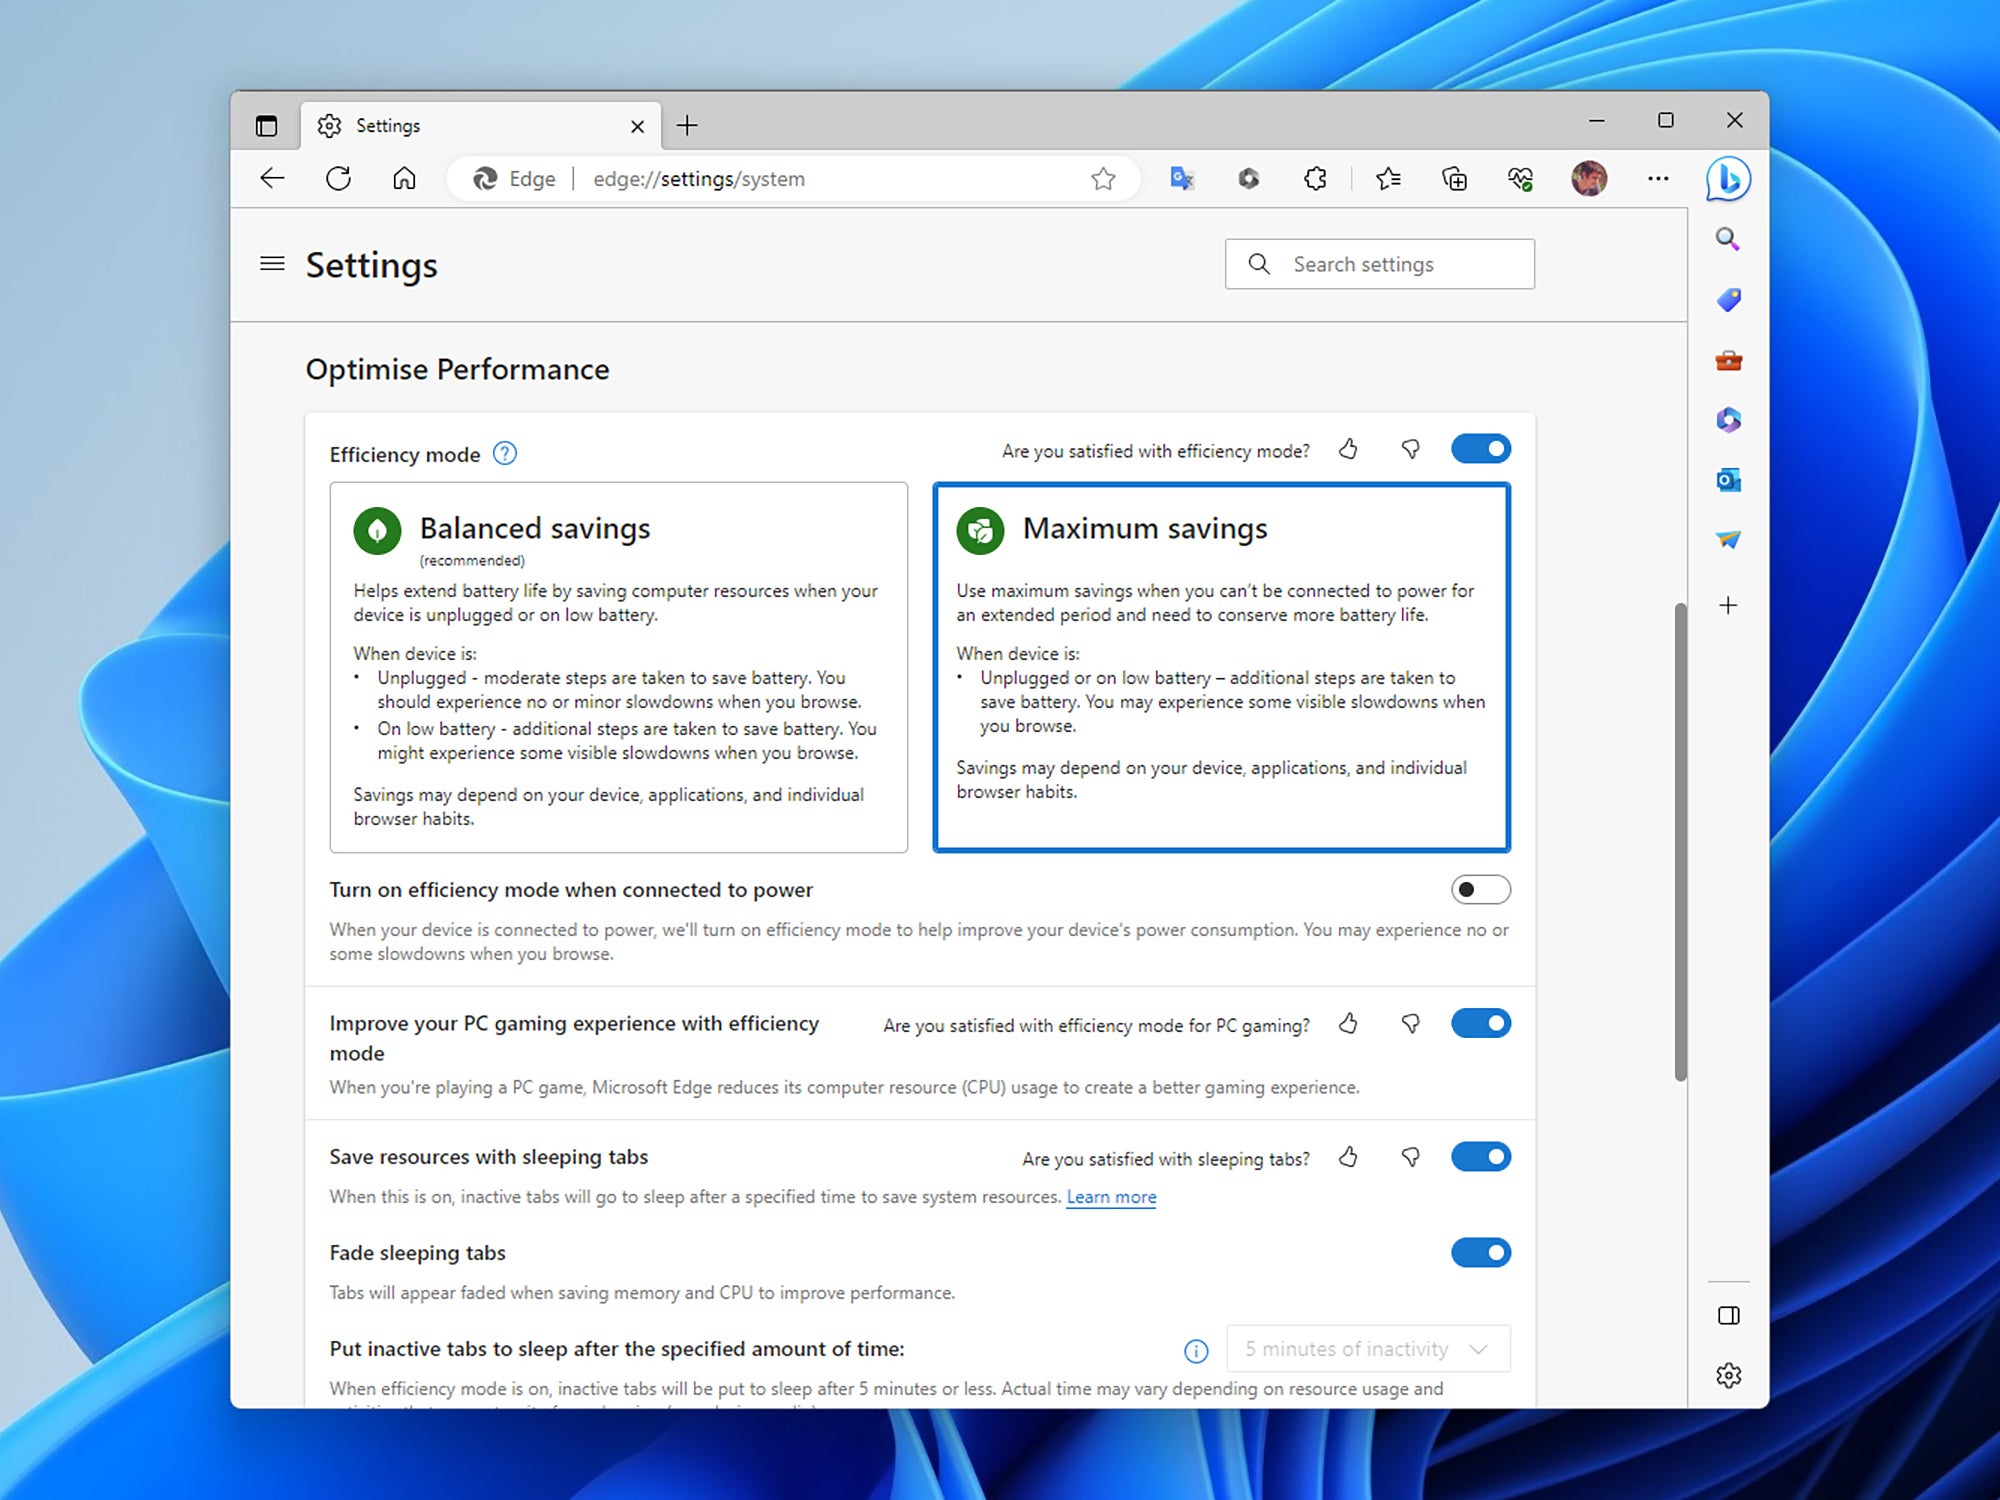 The Efficiency mode settings in Microsoft Edge, showing the options for balanced savings and maximum savings.